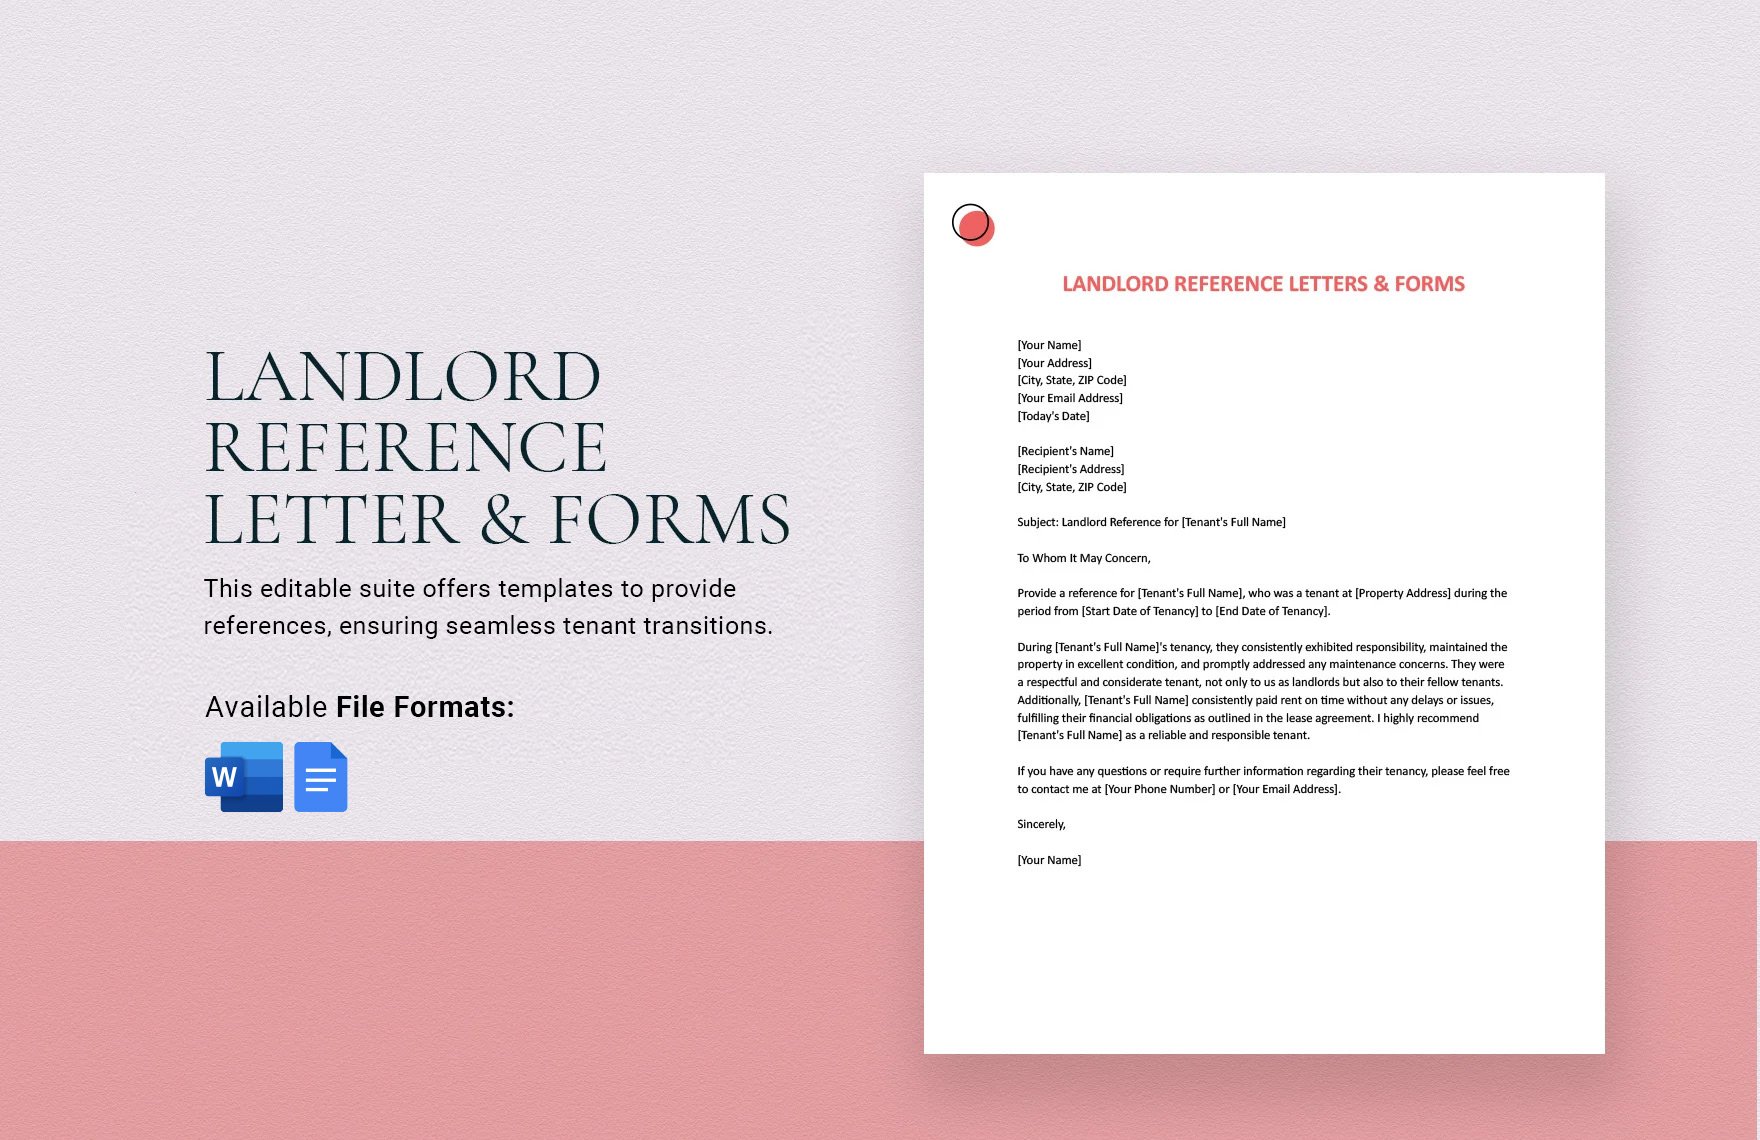 Landlord Reference Letters & Forms